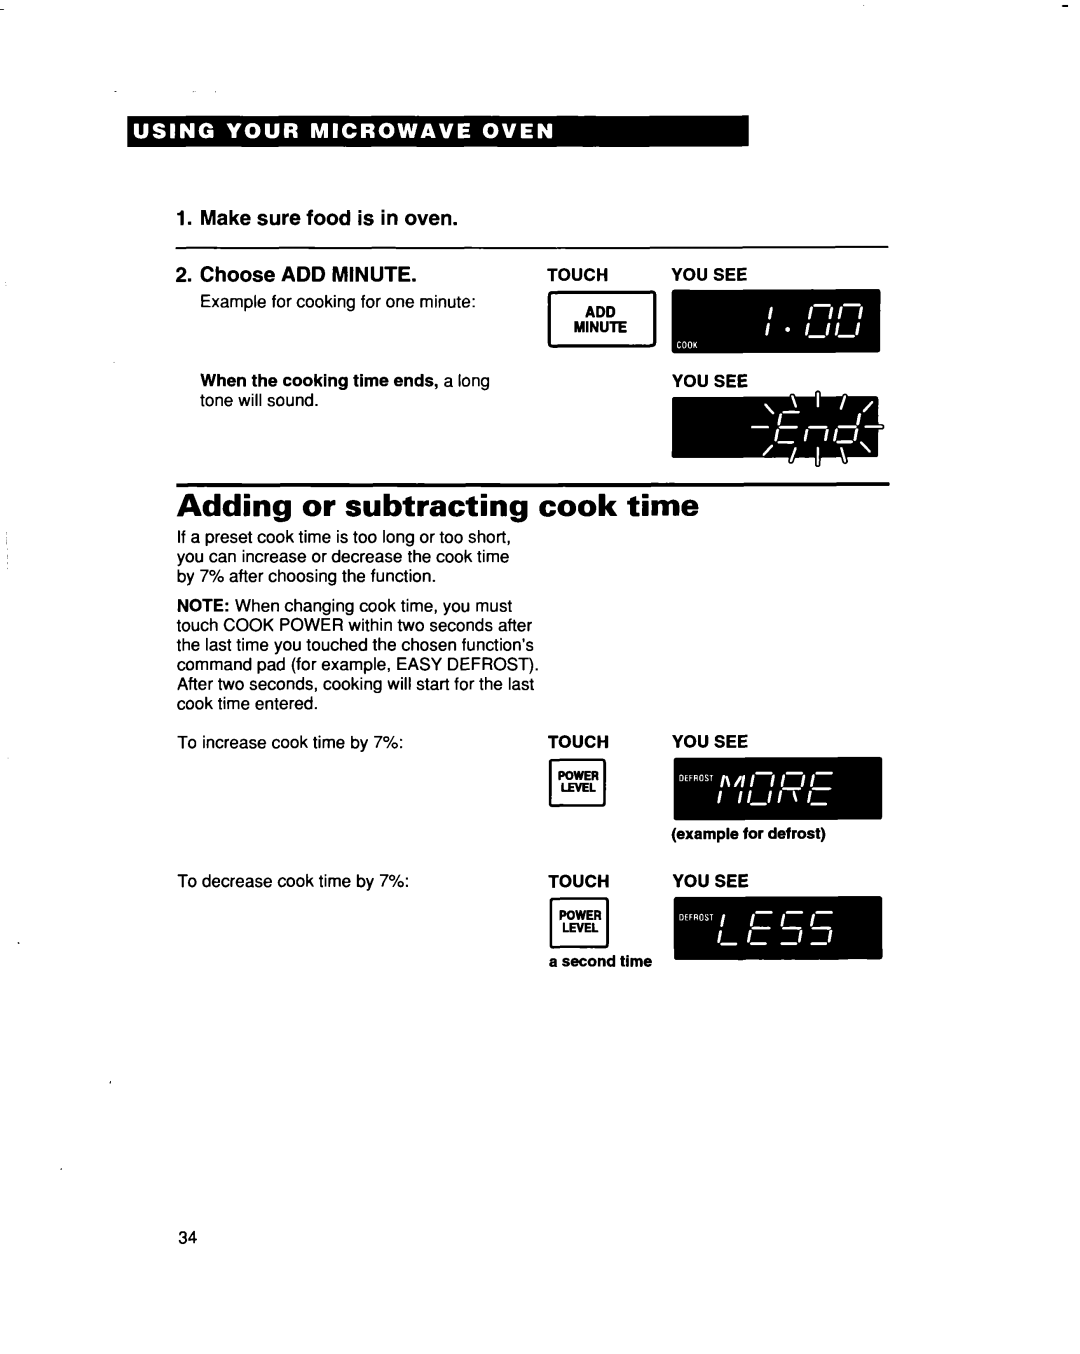 Whirlpool MT5120XAQ Adding or subtracting cook time, Make sure food is in oven, Add Minute, Choose, r-lLEVEL, Touch 